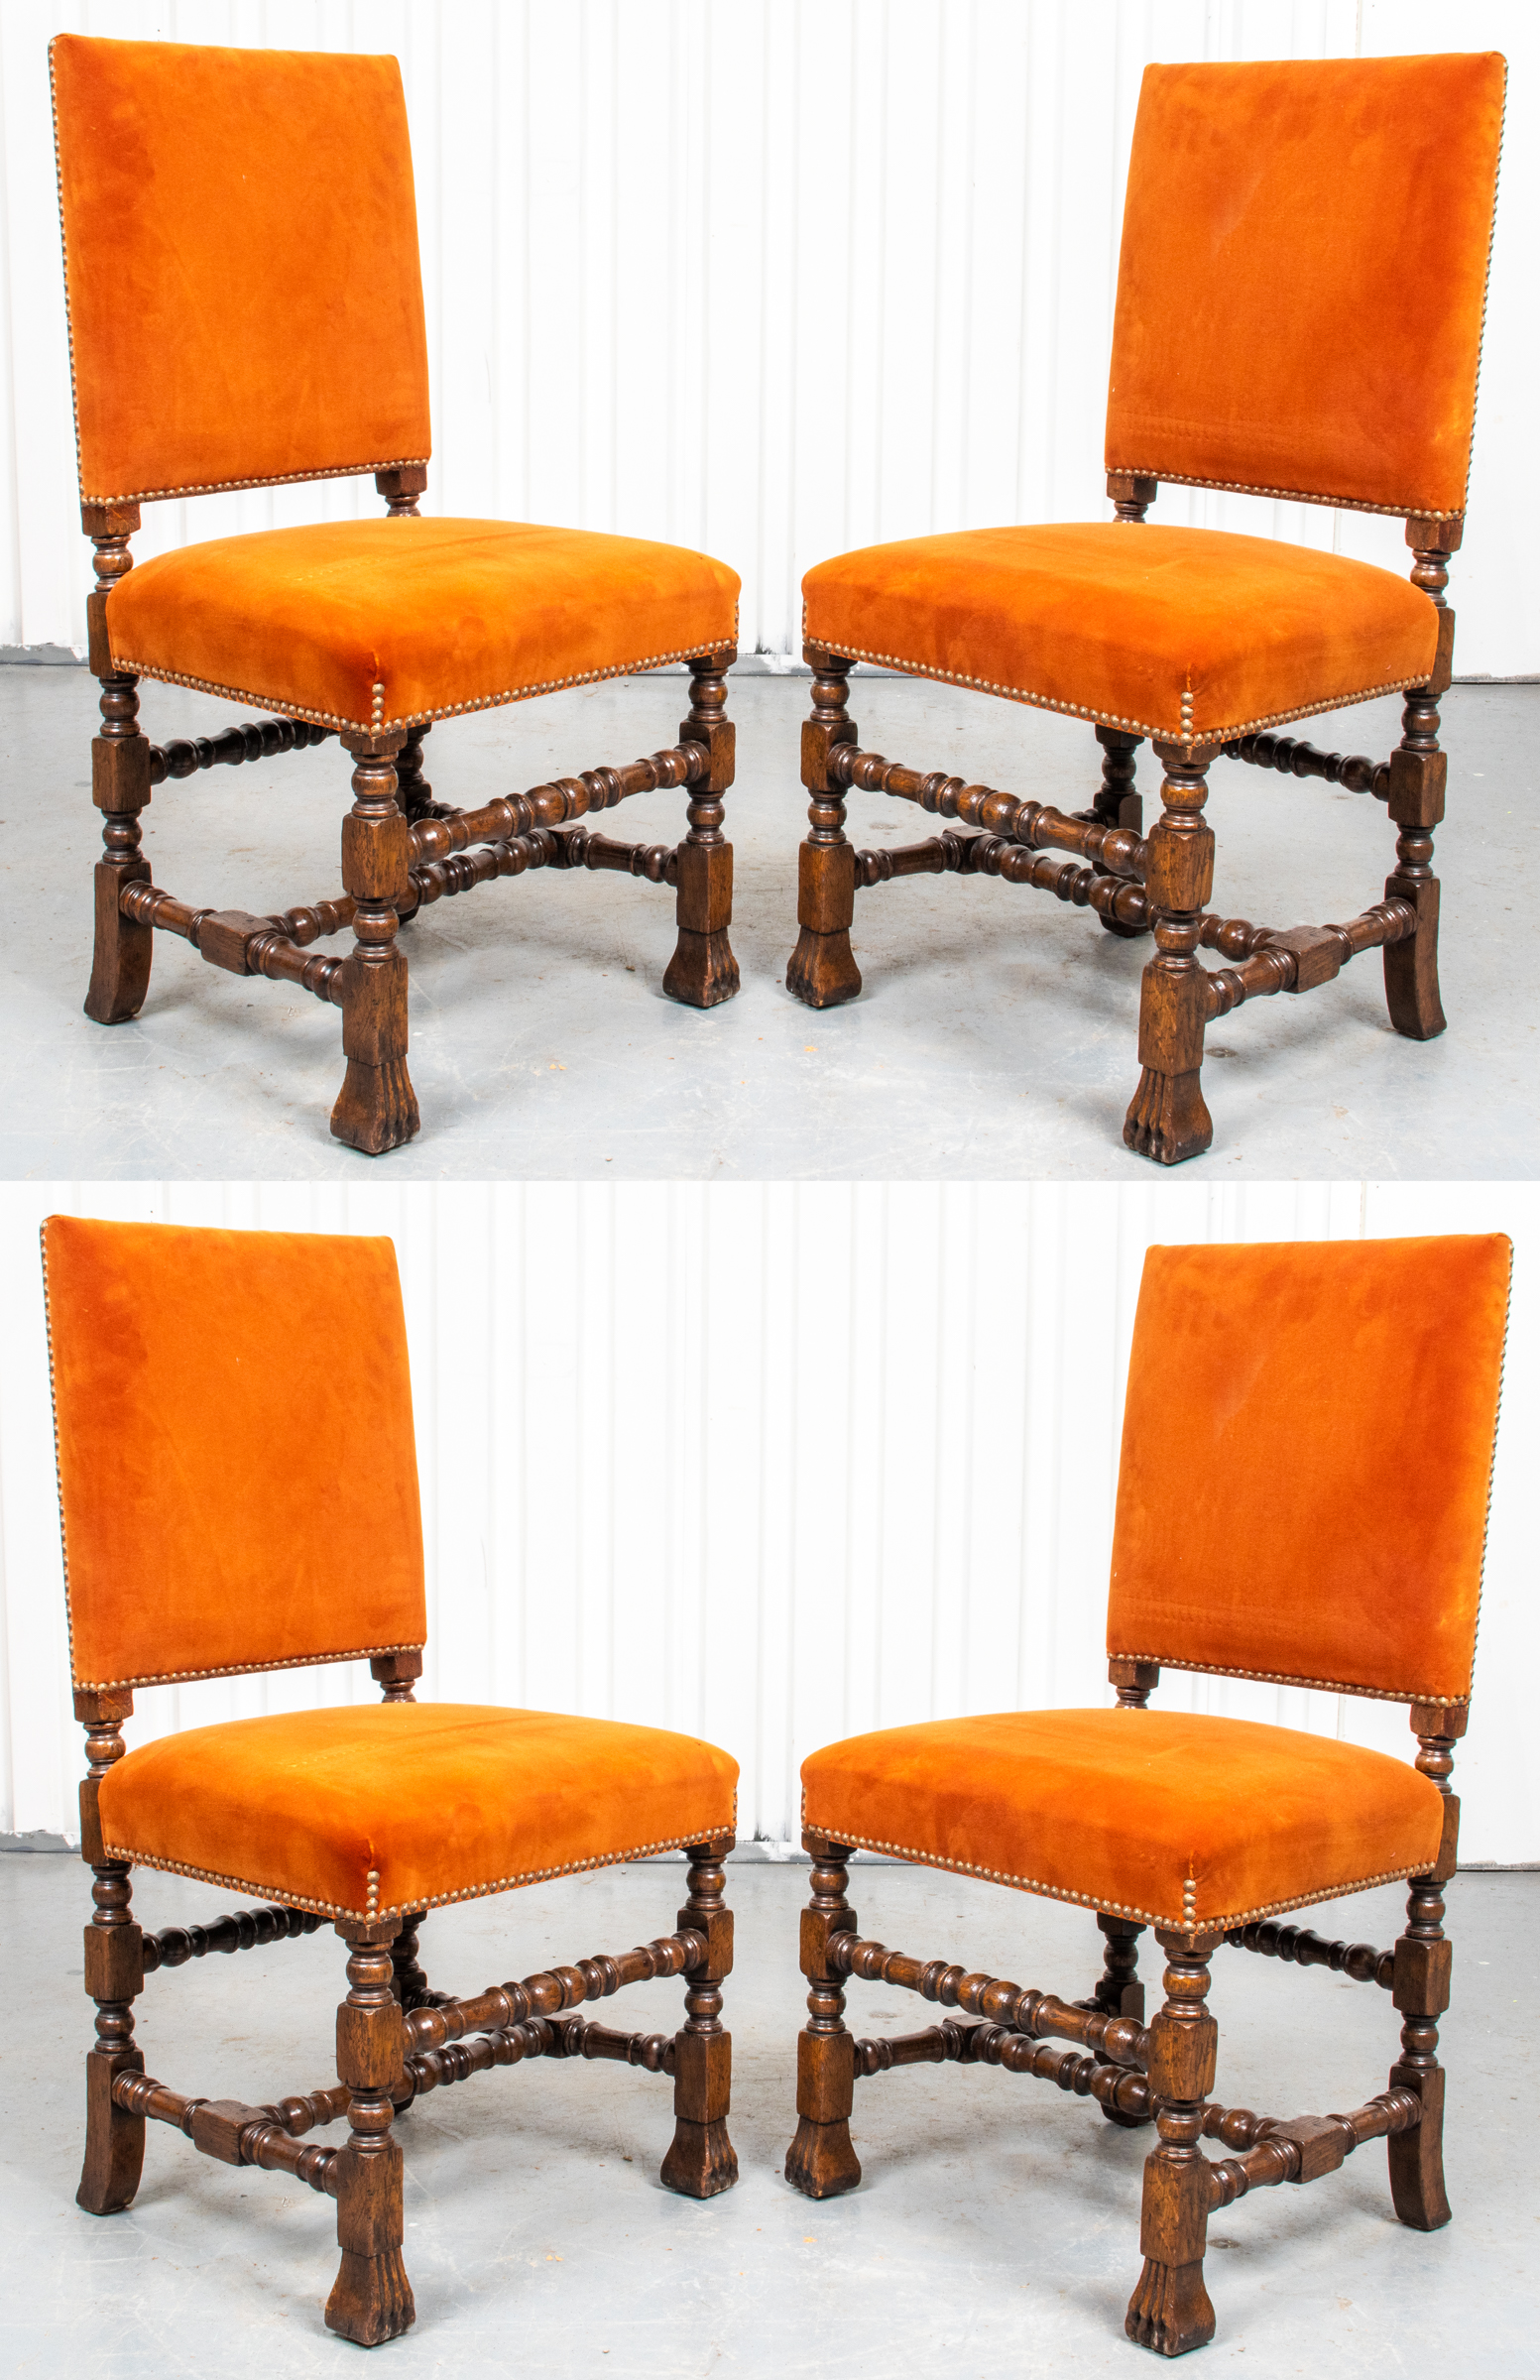 BAROQUE STYLE CARVED OAK SIDE CHAIRS  3c3f66